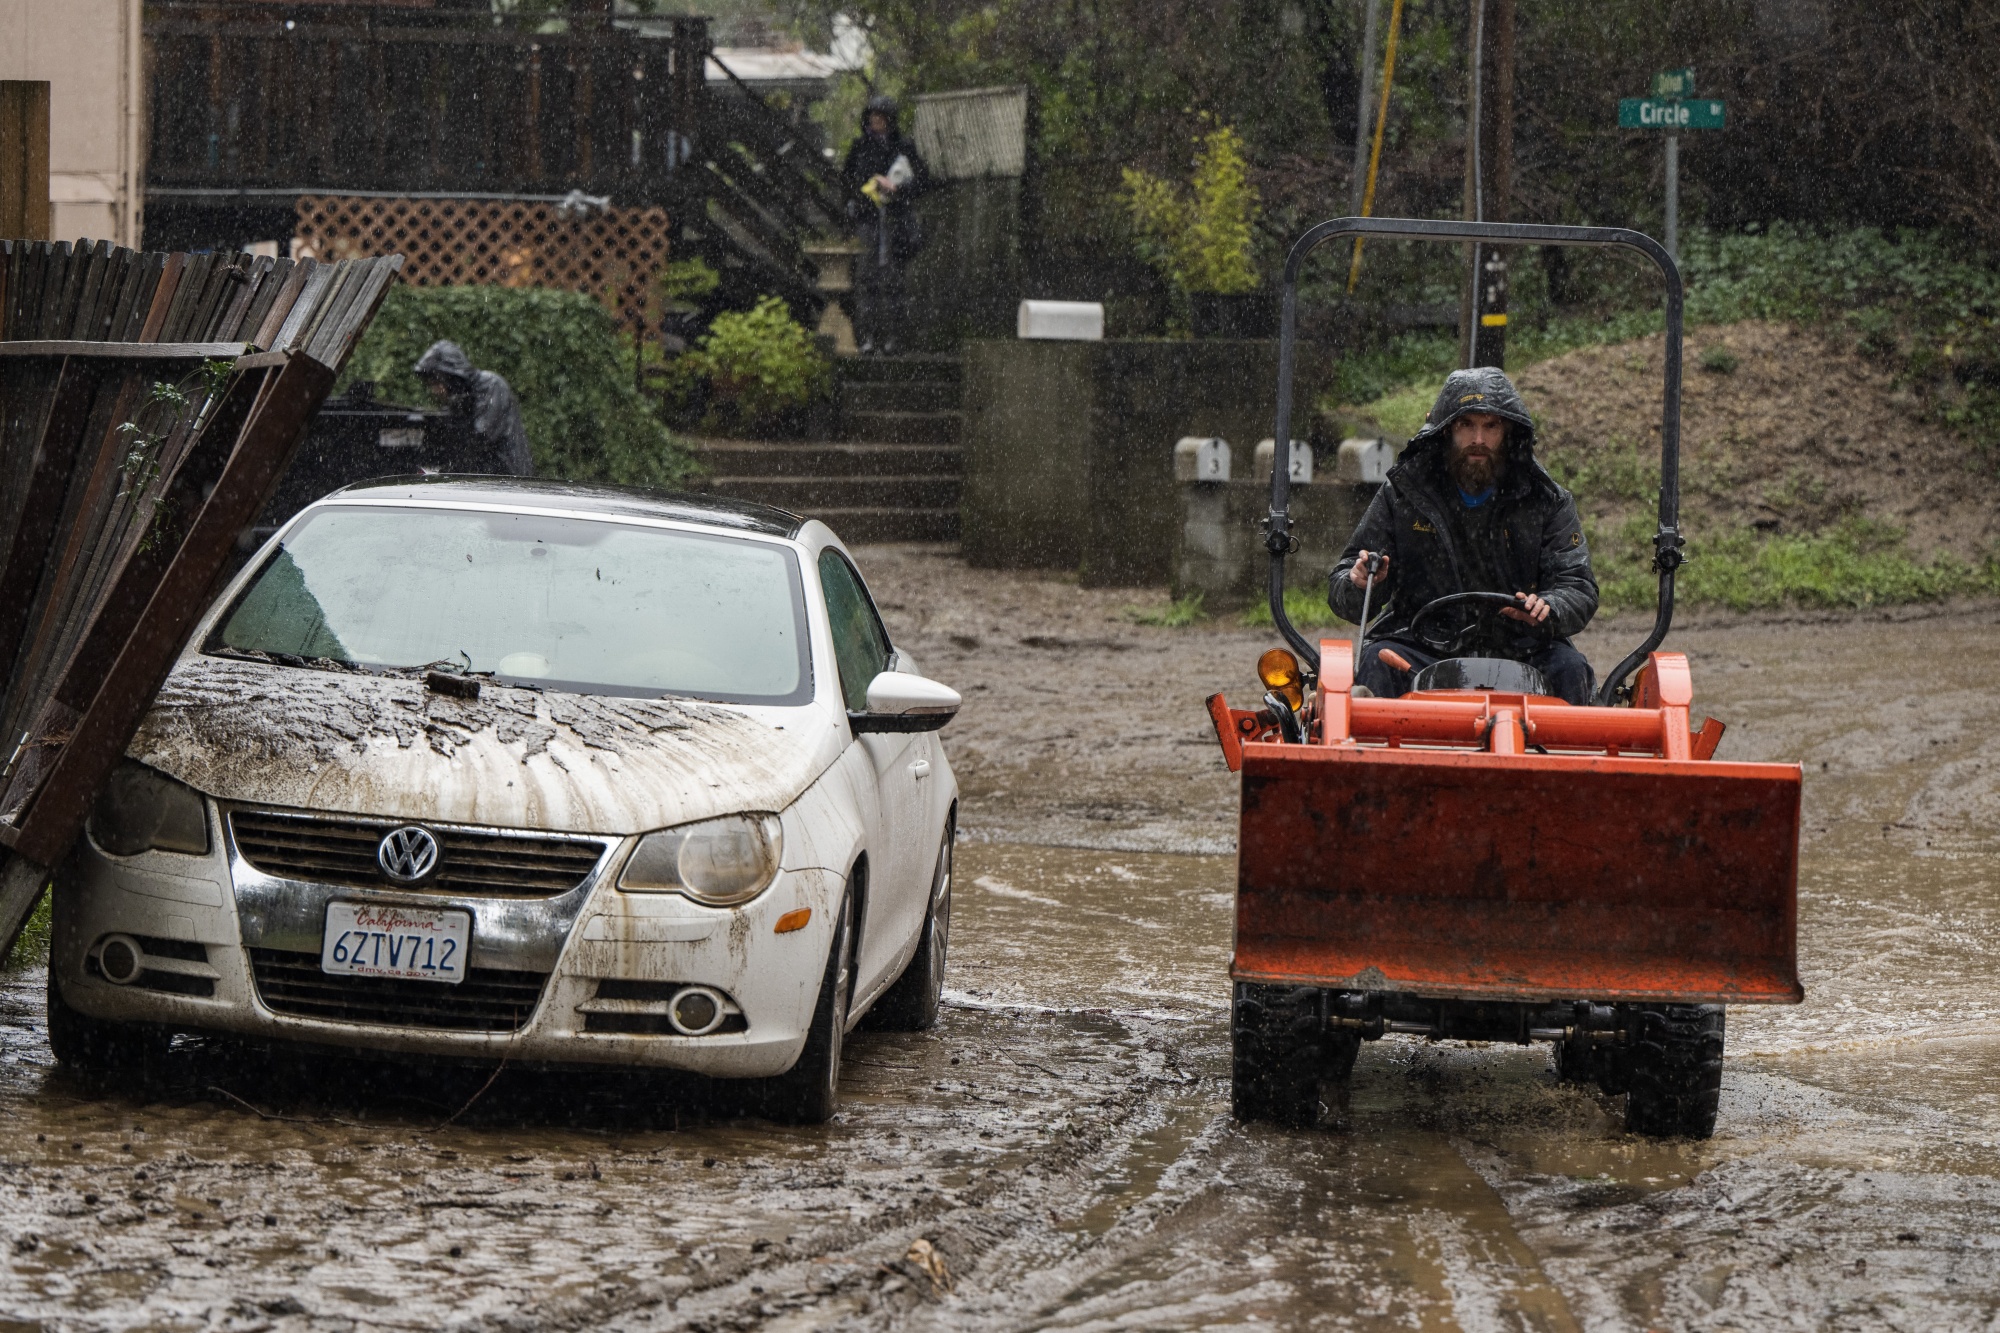 A resident drives a tractor to clear mud after flooding in Felton Grove neighborhood of Felton, California, on Jan. 11.